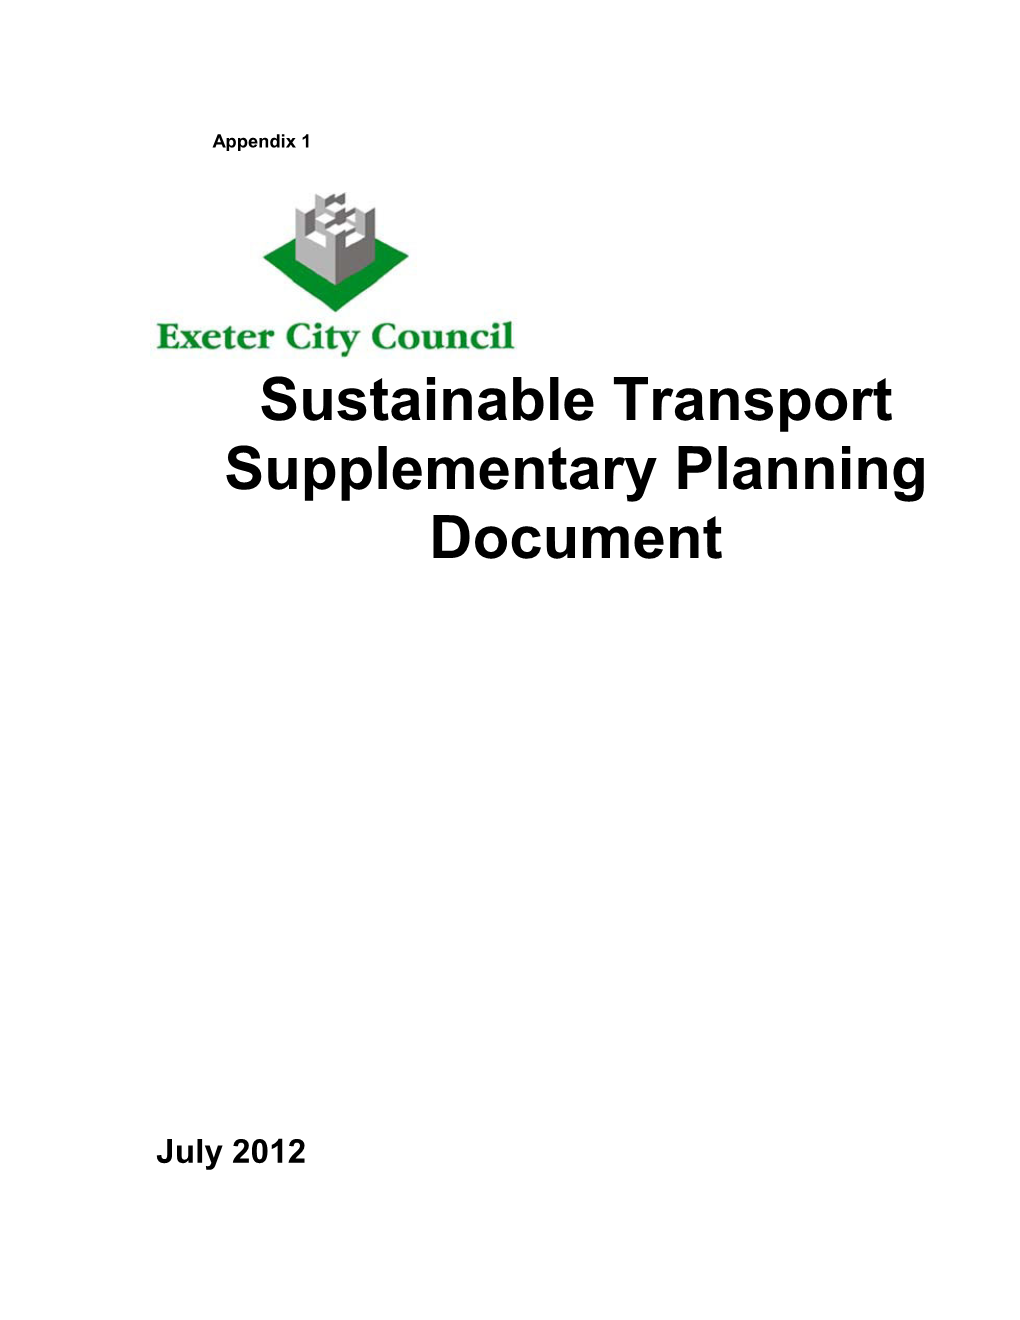 Sustainable Transport Supplementary Planning Document